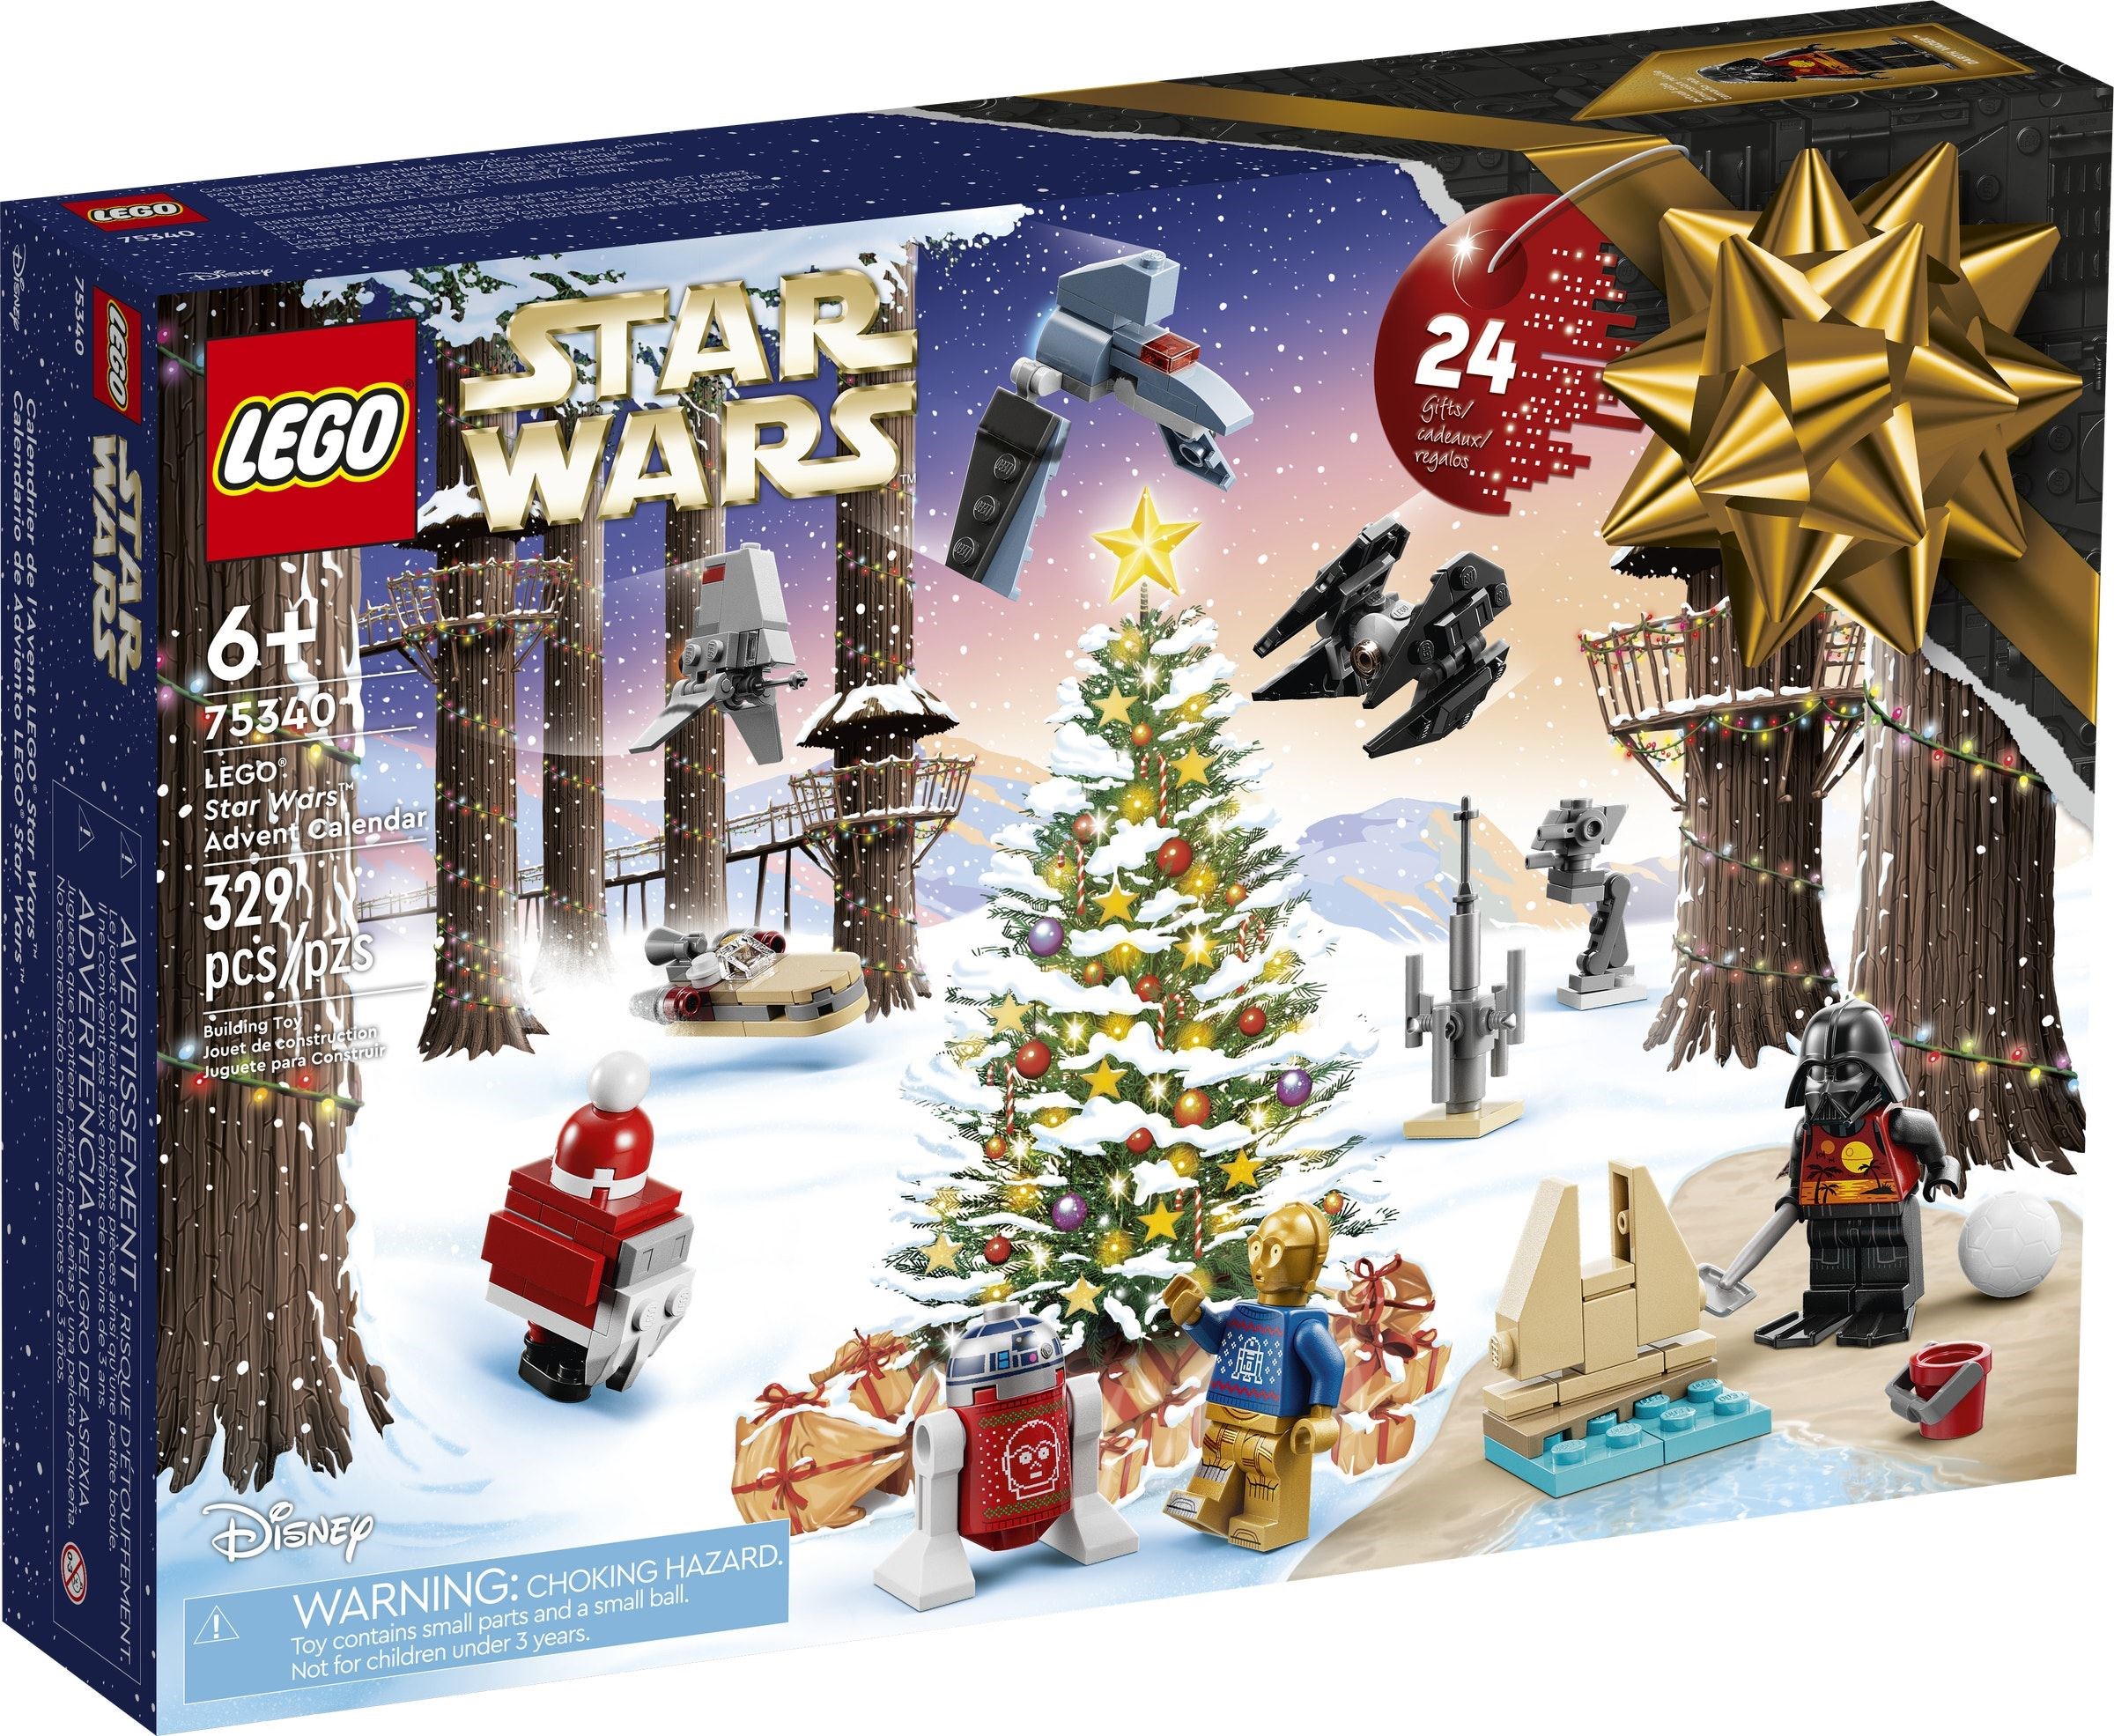 star-wars-and-harry-potter-advent-calendars-officially-revealed-brickset-lego-set-guide-and